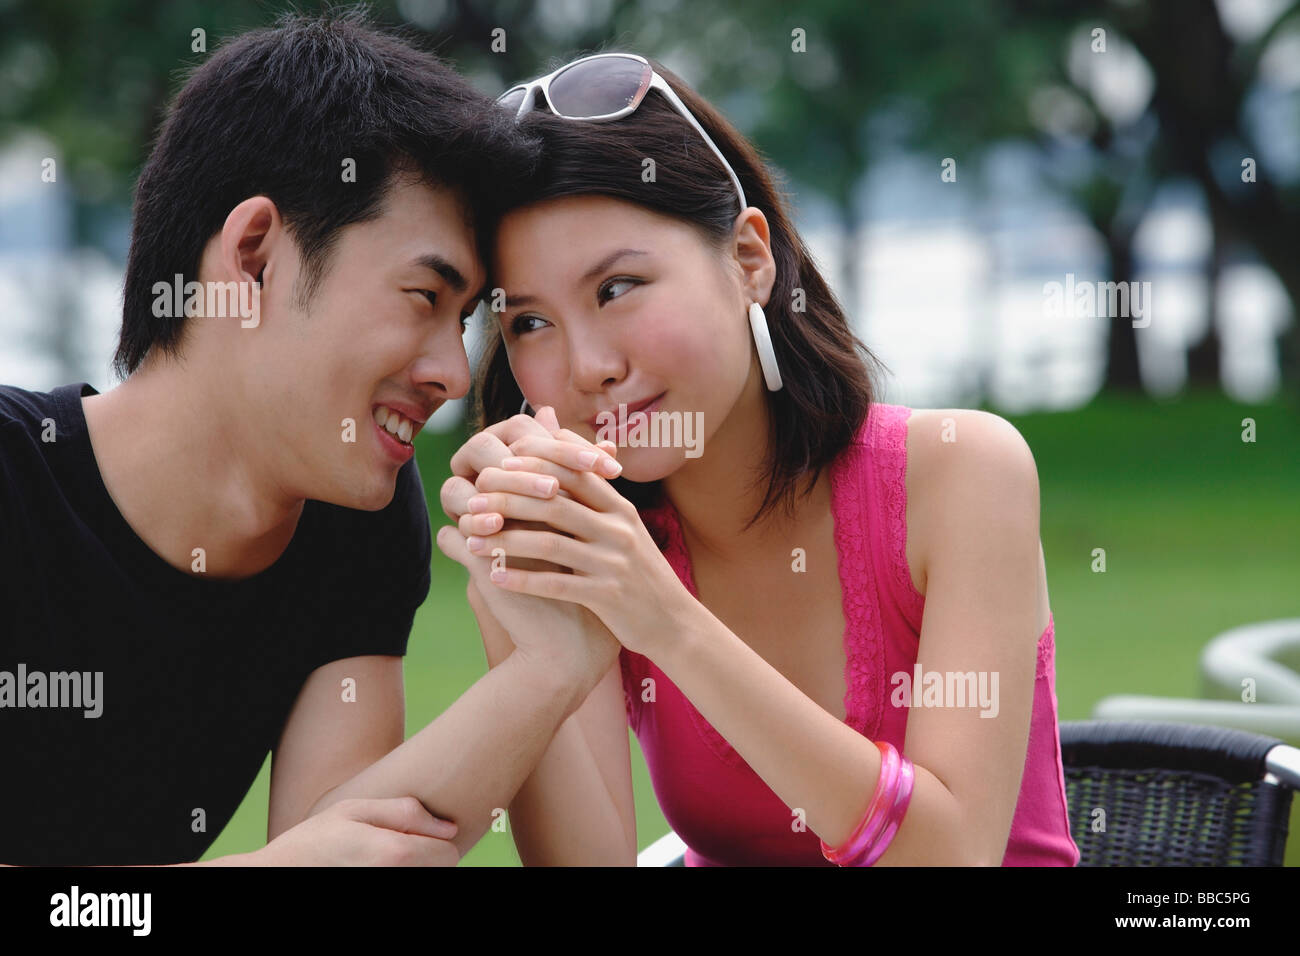 Couple sitting side by side, face to face, holding hands Stock Photo